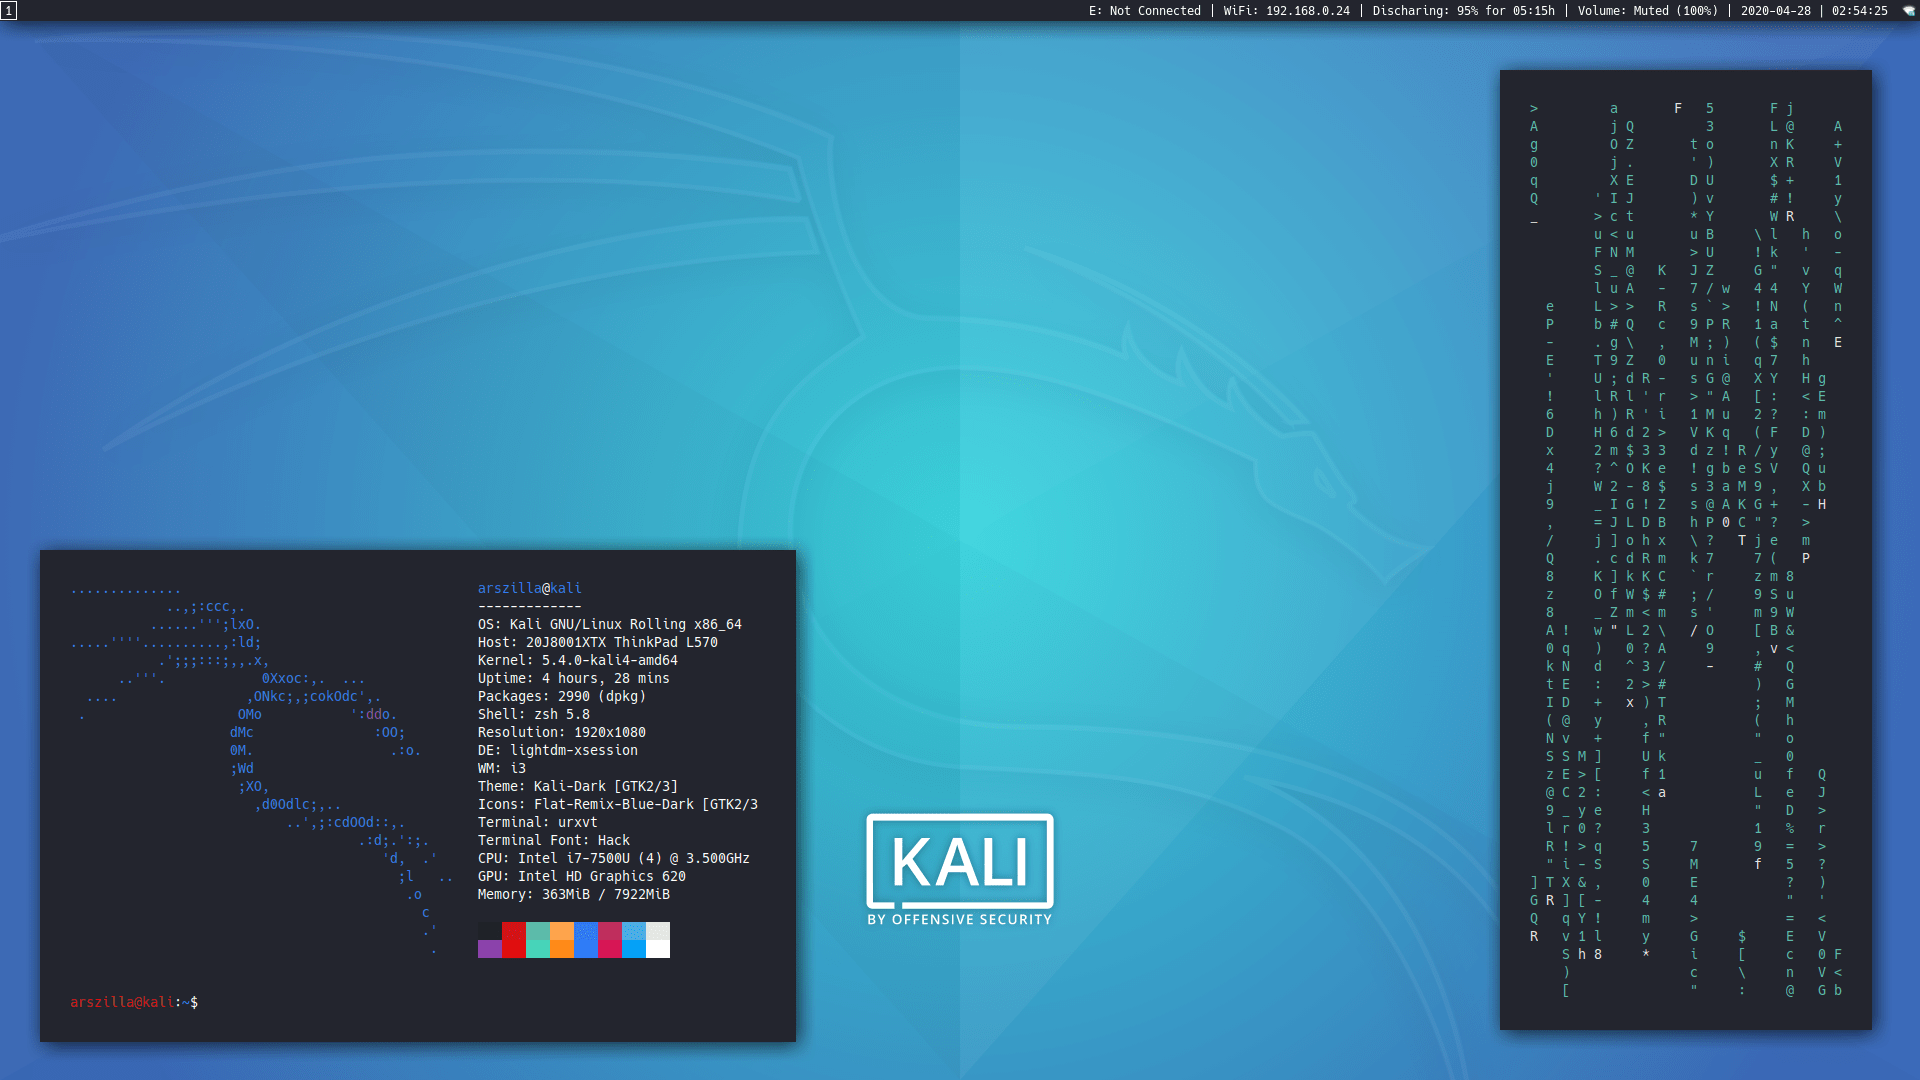 Kali-i3-gaps - An old but an accurate image of the end product